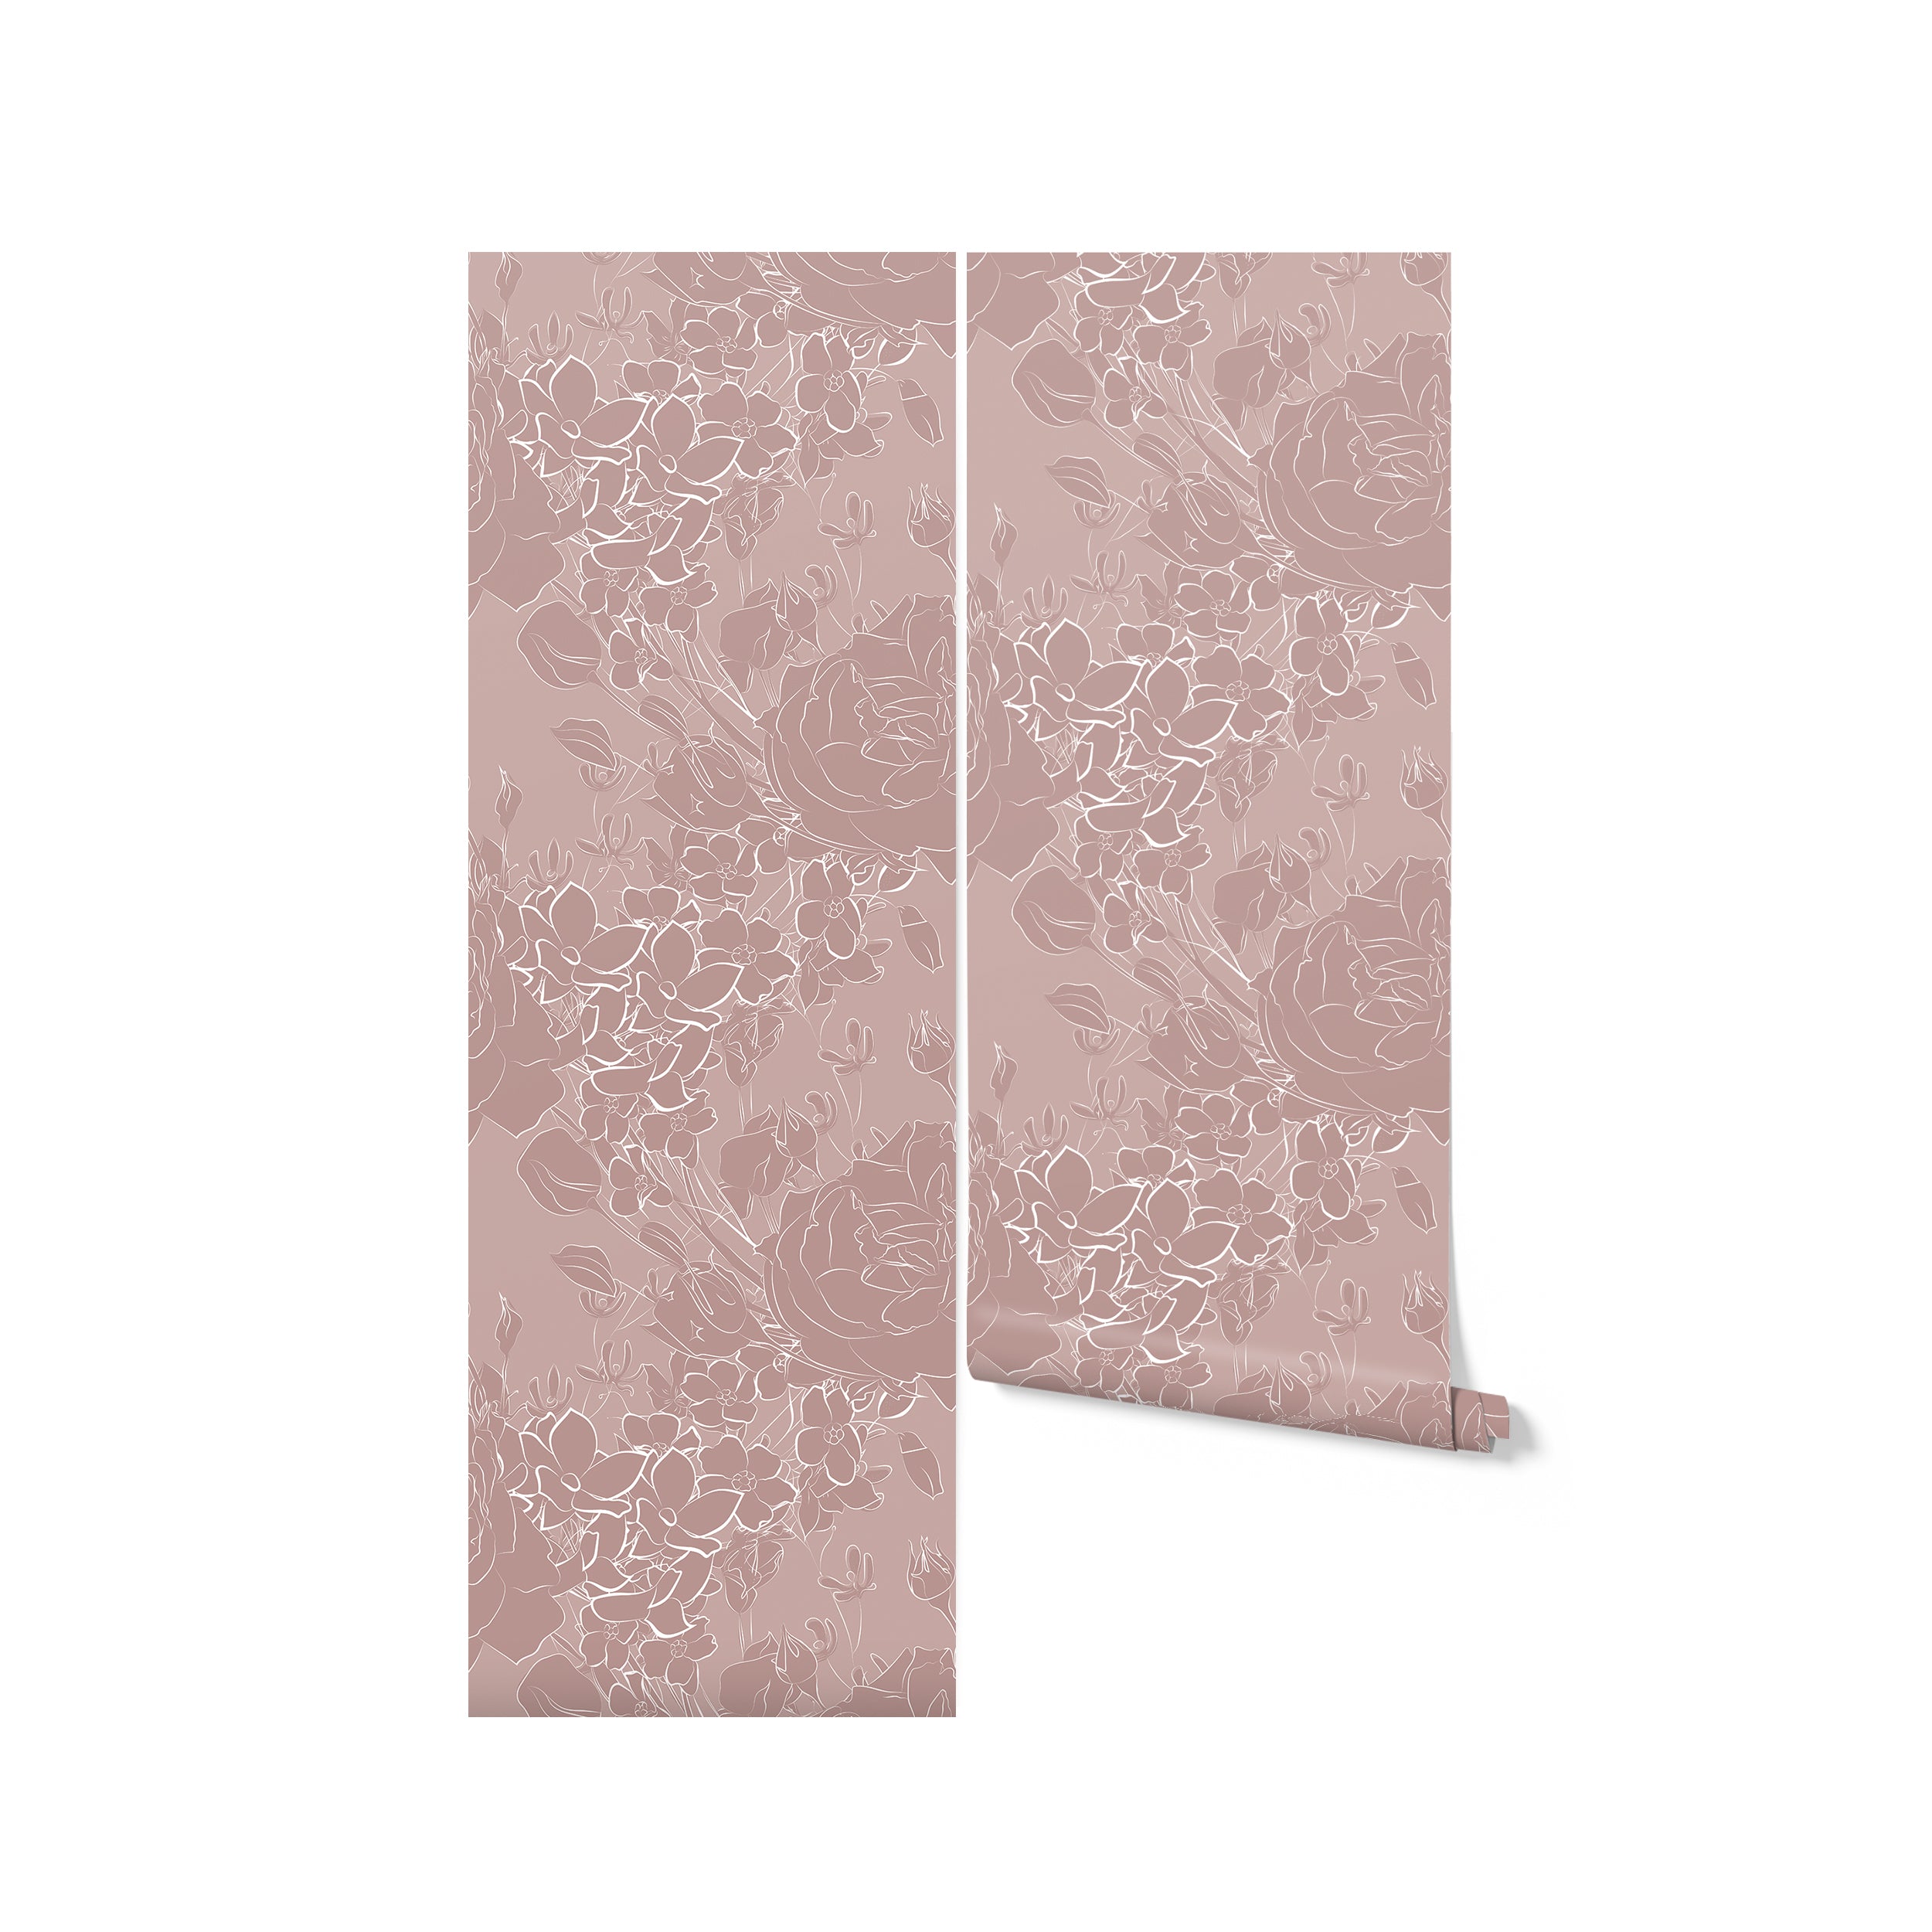 Close-up image of the Dusty Rose Floral Wallpaper, highlighting intricate white line drawings of roses on a muted pink background. The detailed artwork adds sophistication and grace to any room.